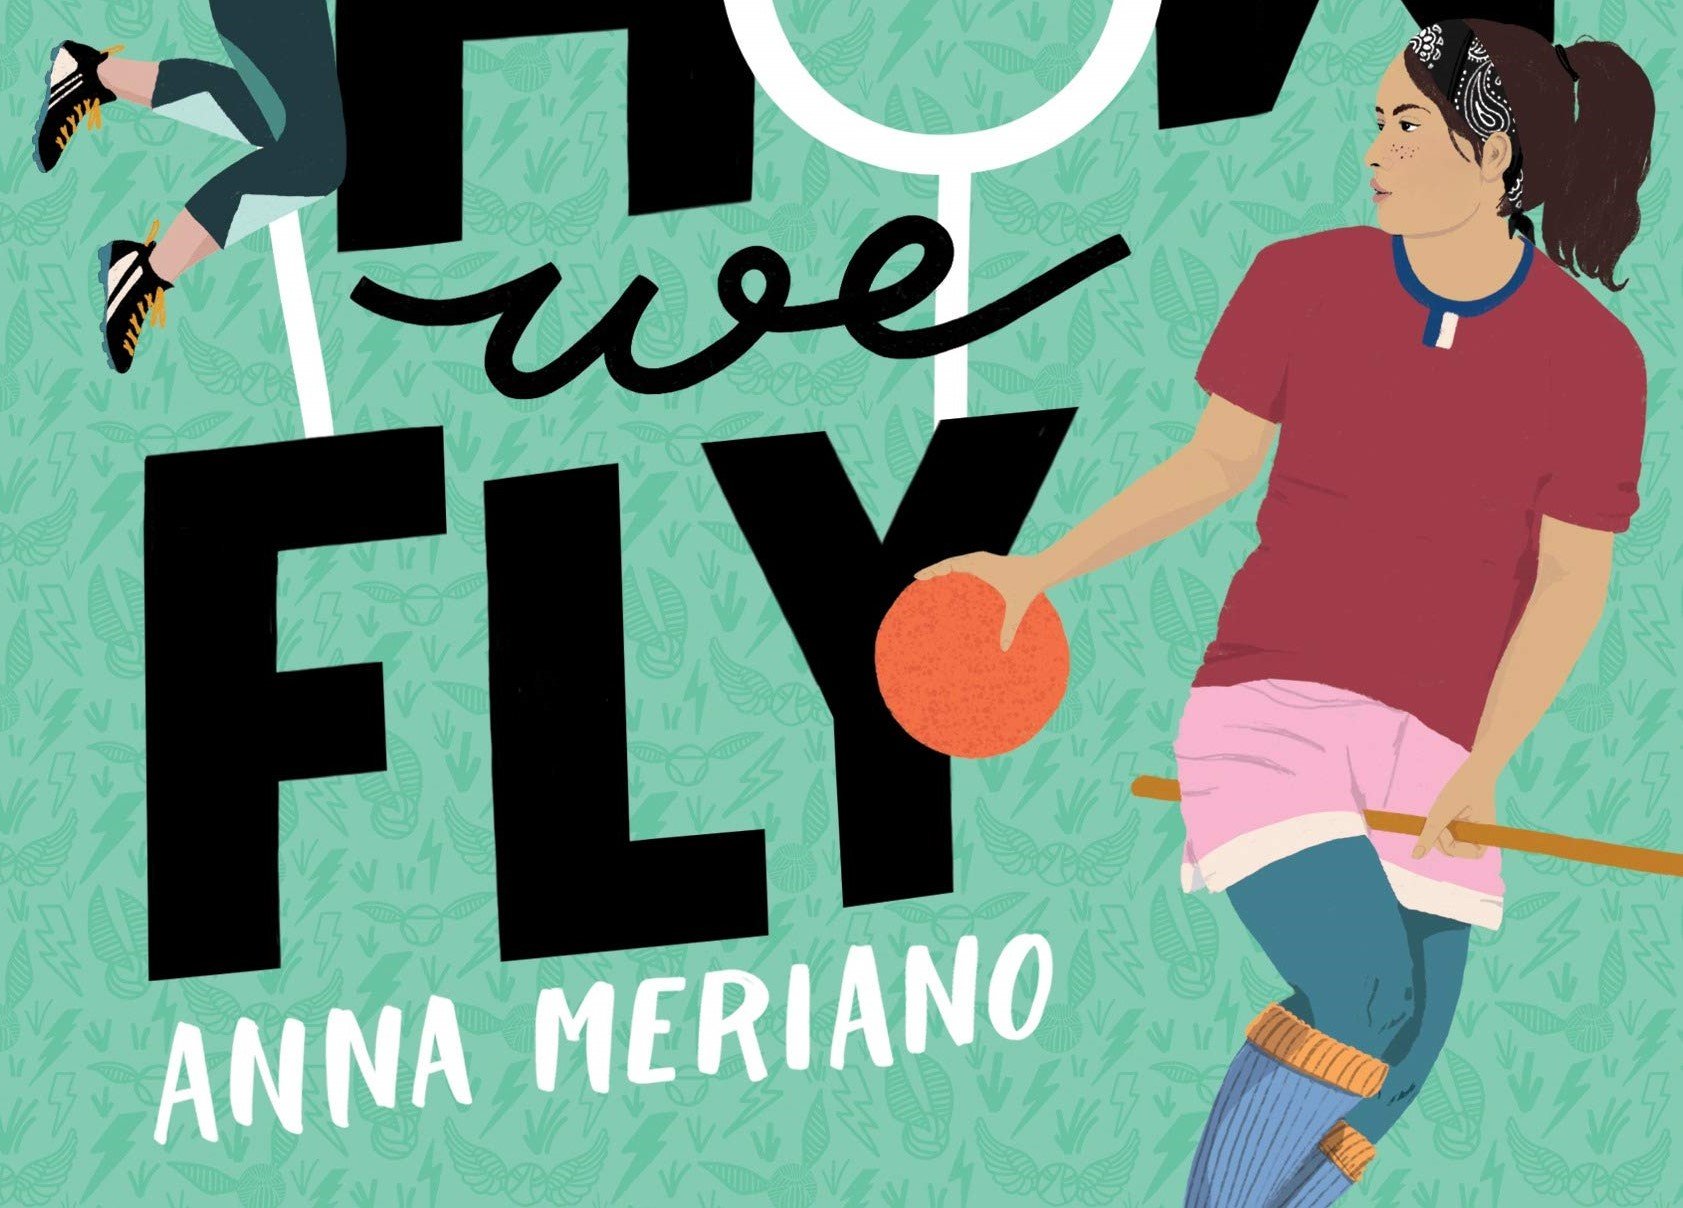 Book cover for This Is How We Fly by Ana Meriano